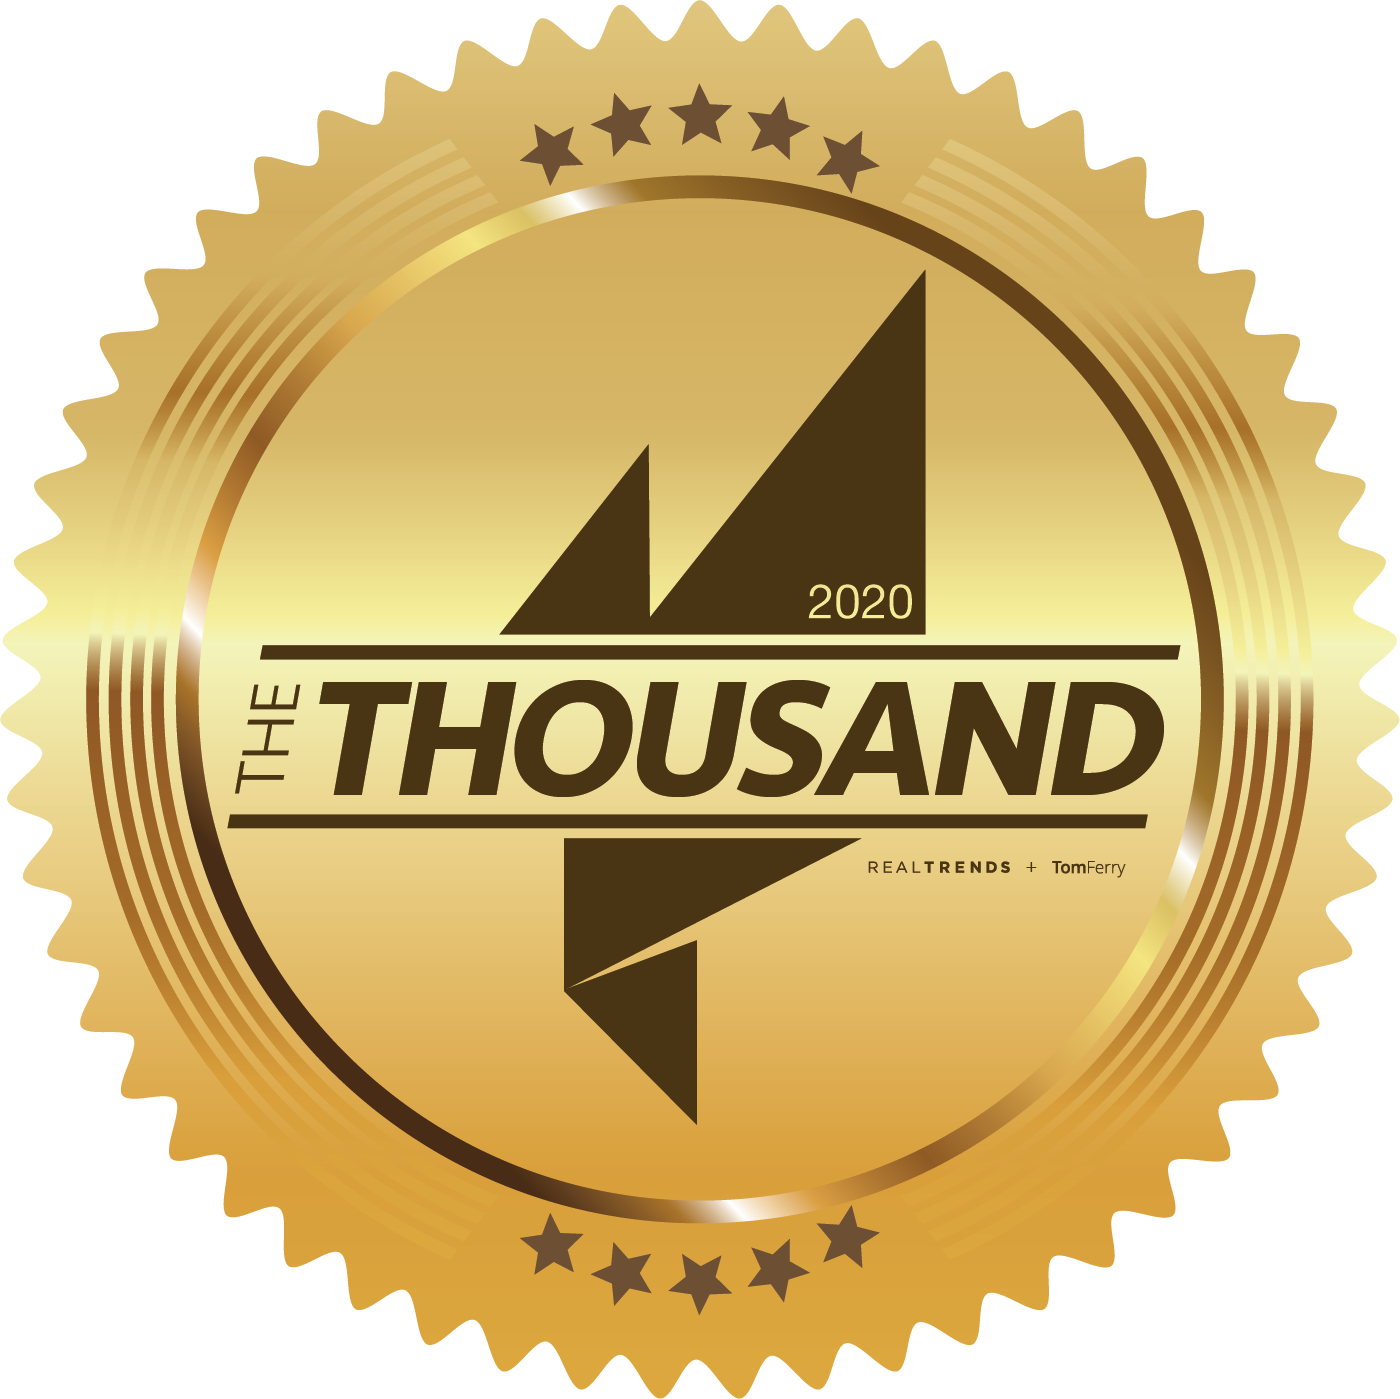 The Thousand Real Trends logo